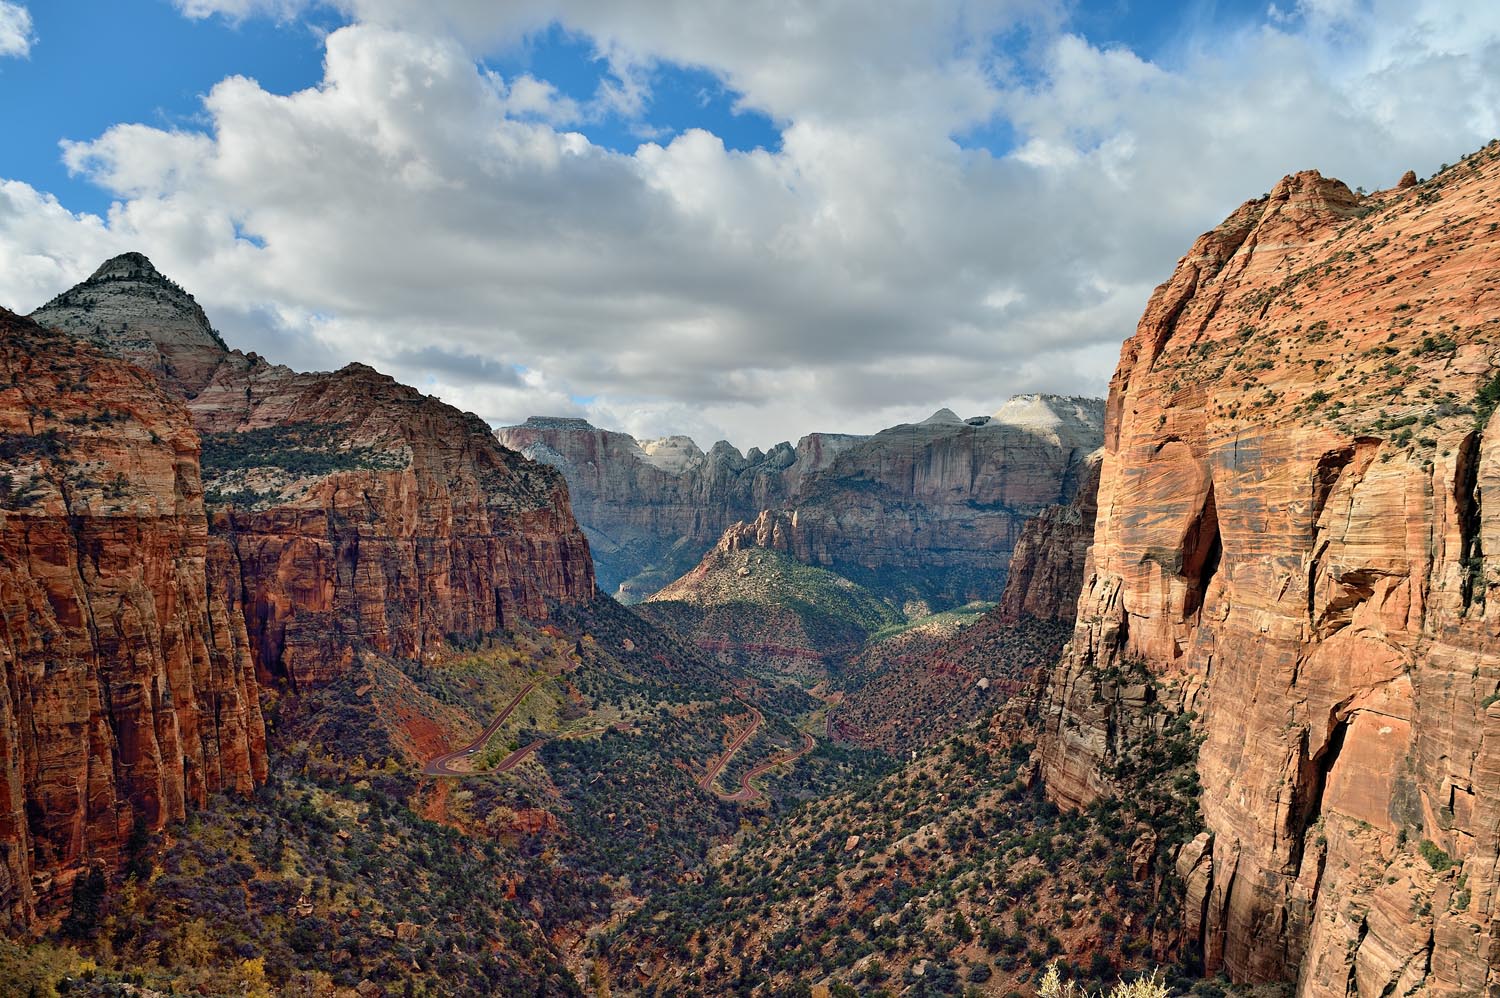 The Amazing Life: Zion: Canyon Overlook Trail